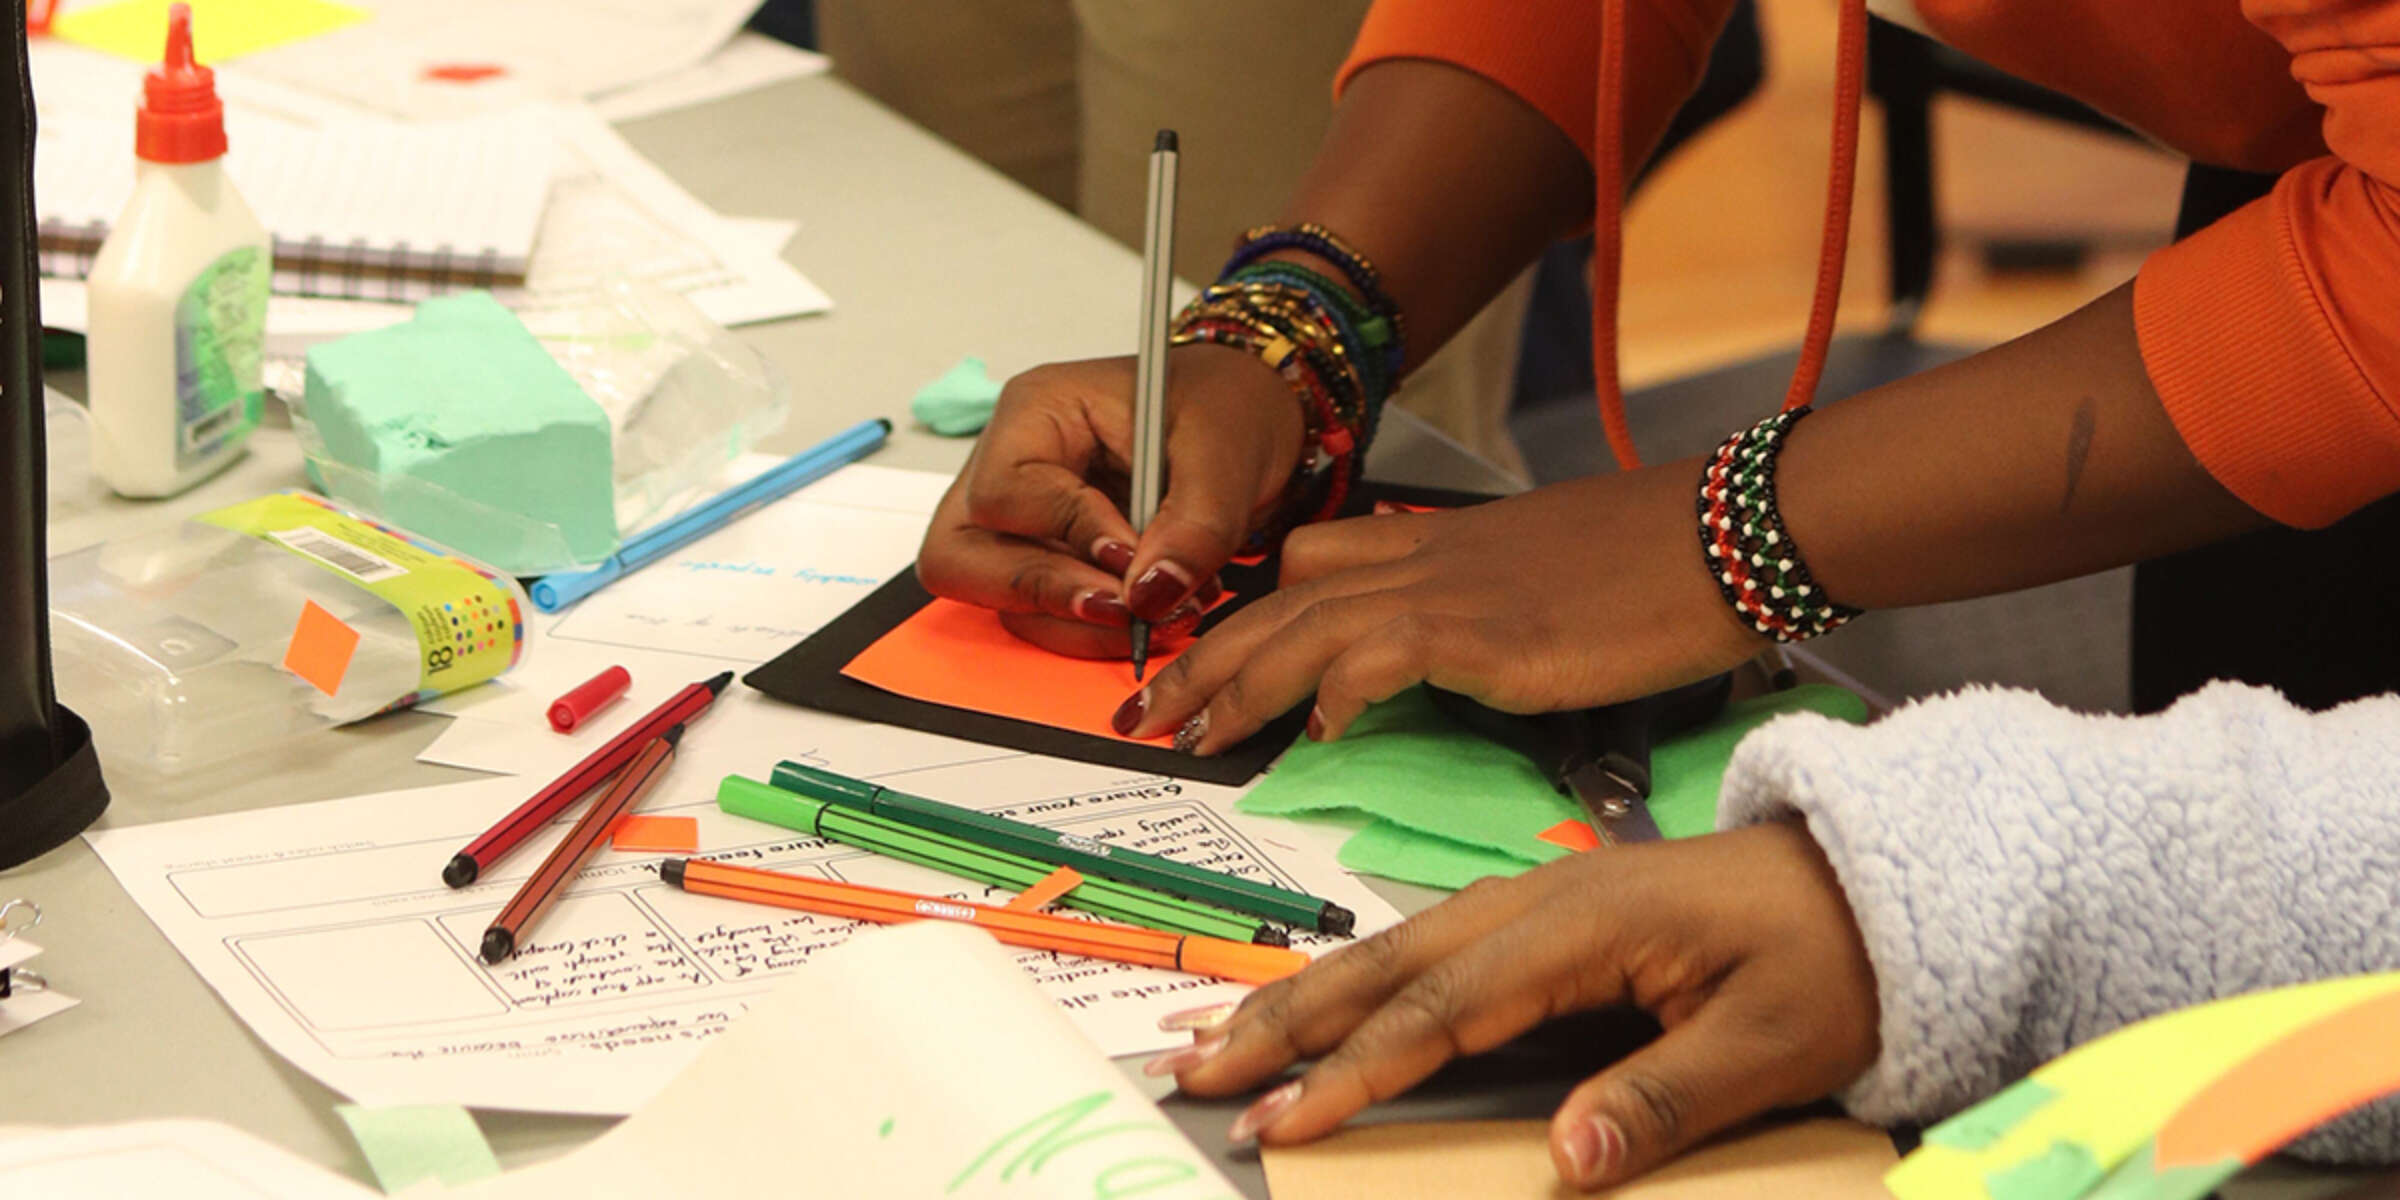 Someone is using a silver pen to draw on an orange piece of paper, surrounded by various art supplies like colored markers, glue, paper, and scissors on a table. The person is wearing multiple colorful bracelets and a red sweater. Another person's hand at the bottom of the image is holding paperwork.